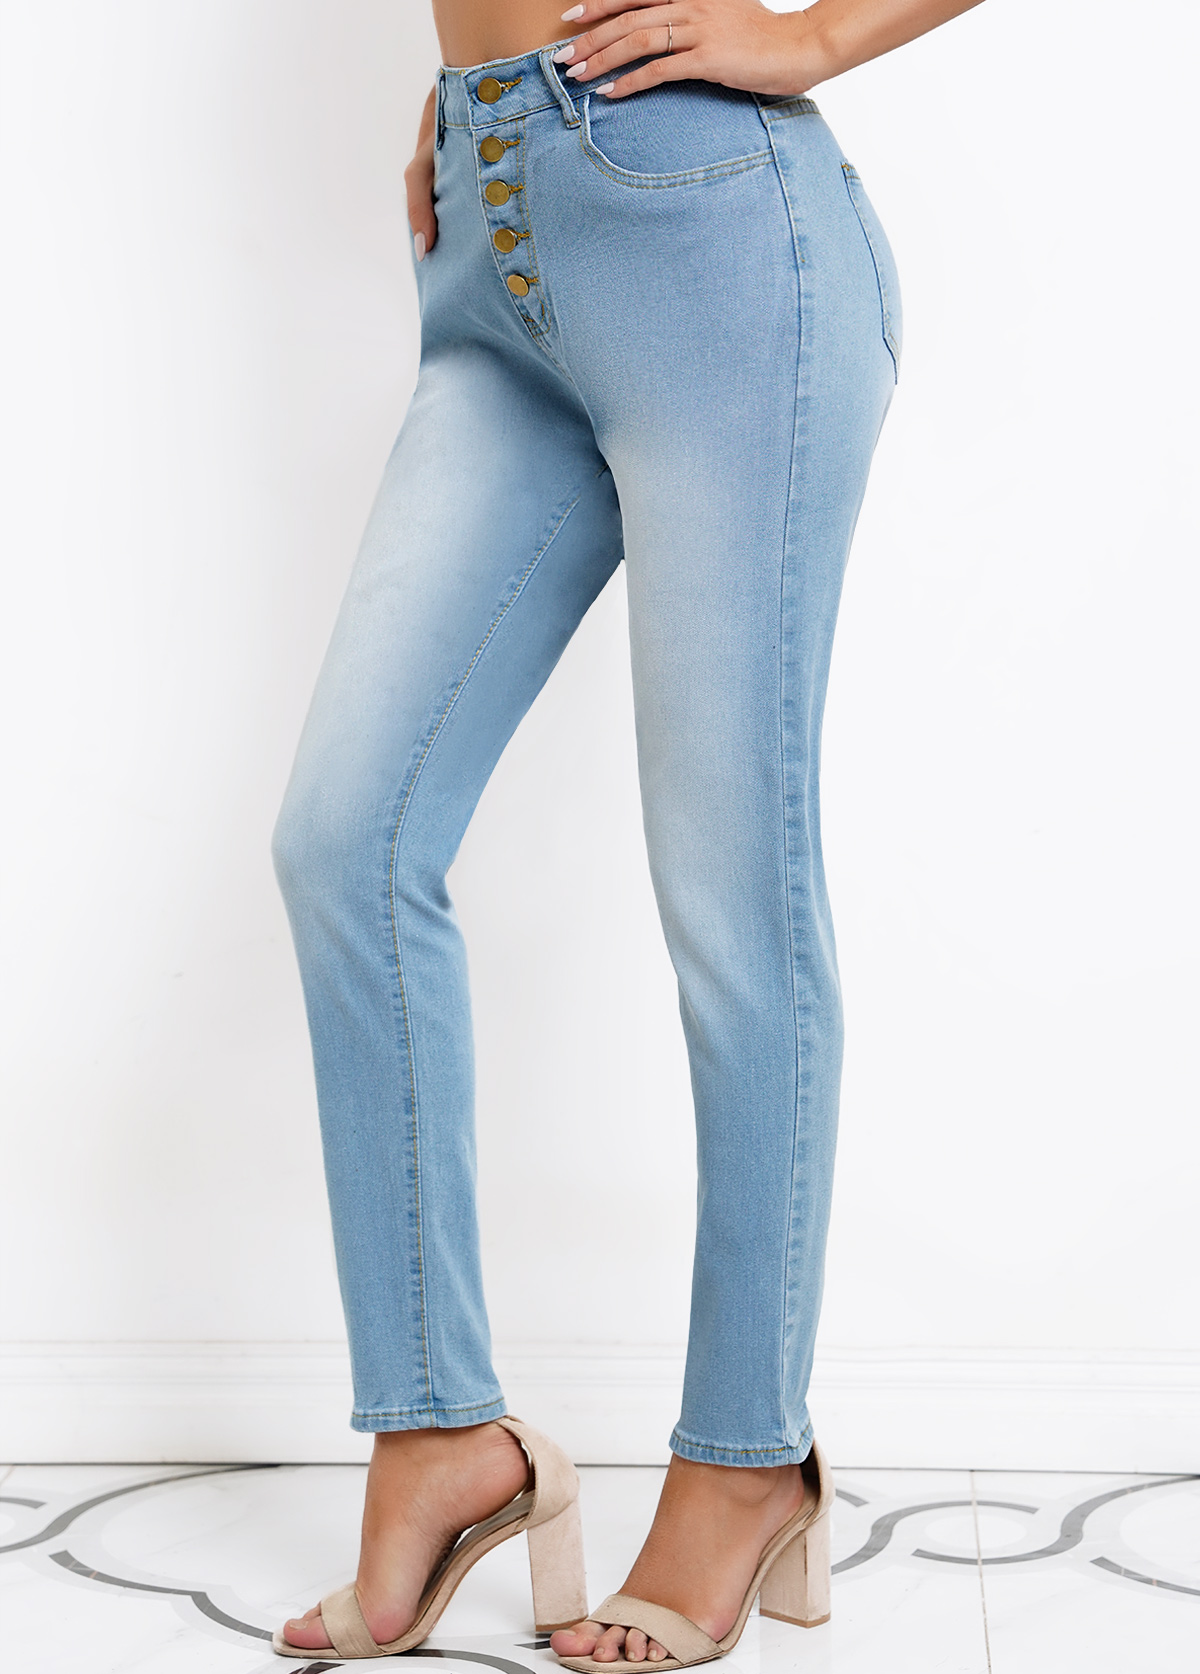 Denim Blue Skinny High Waisted Button Jeans